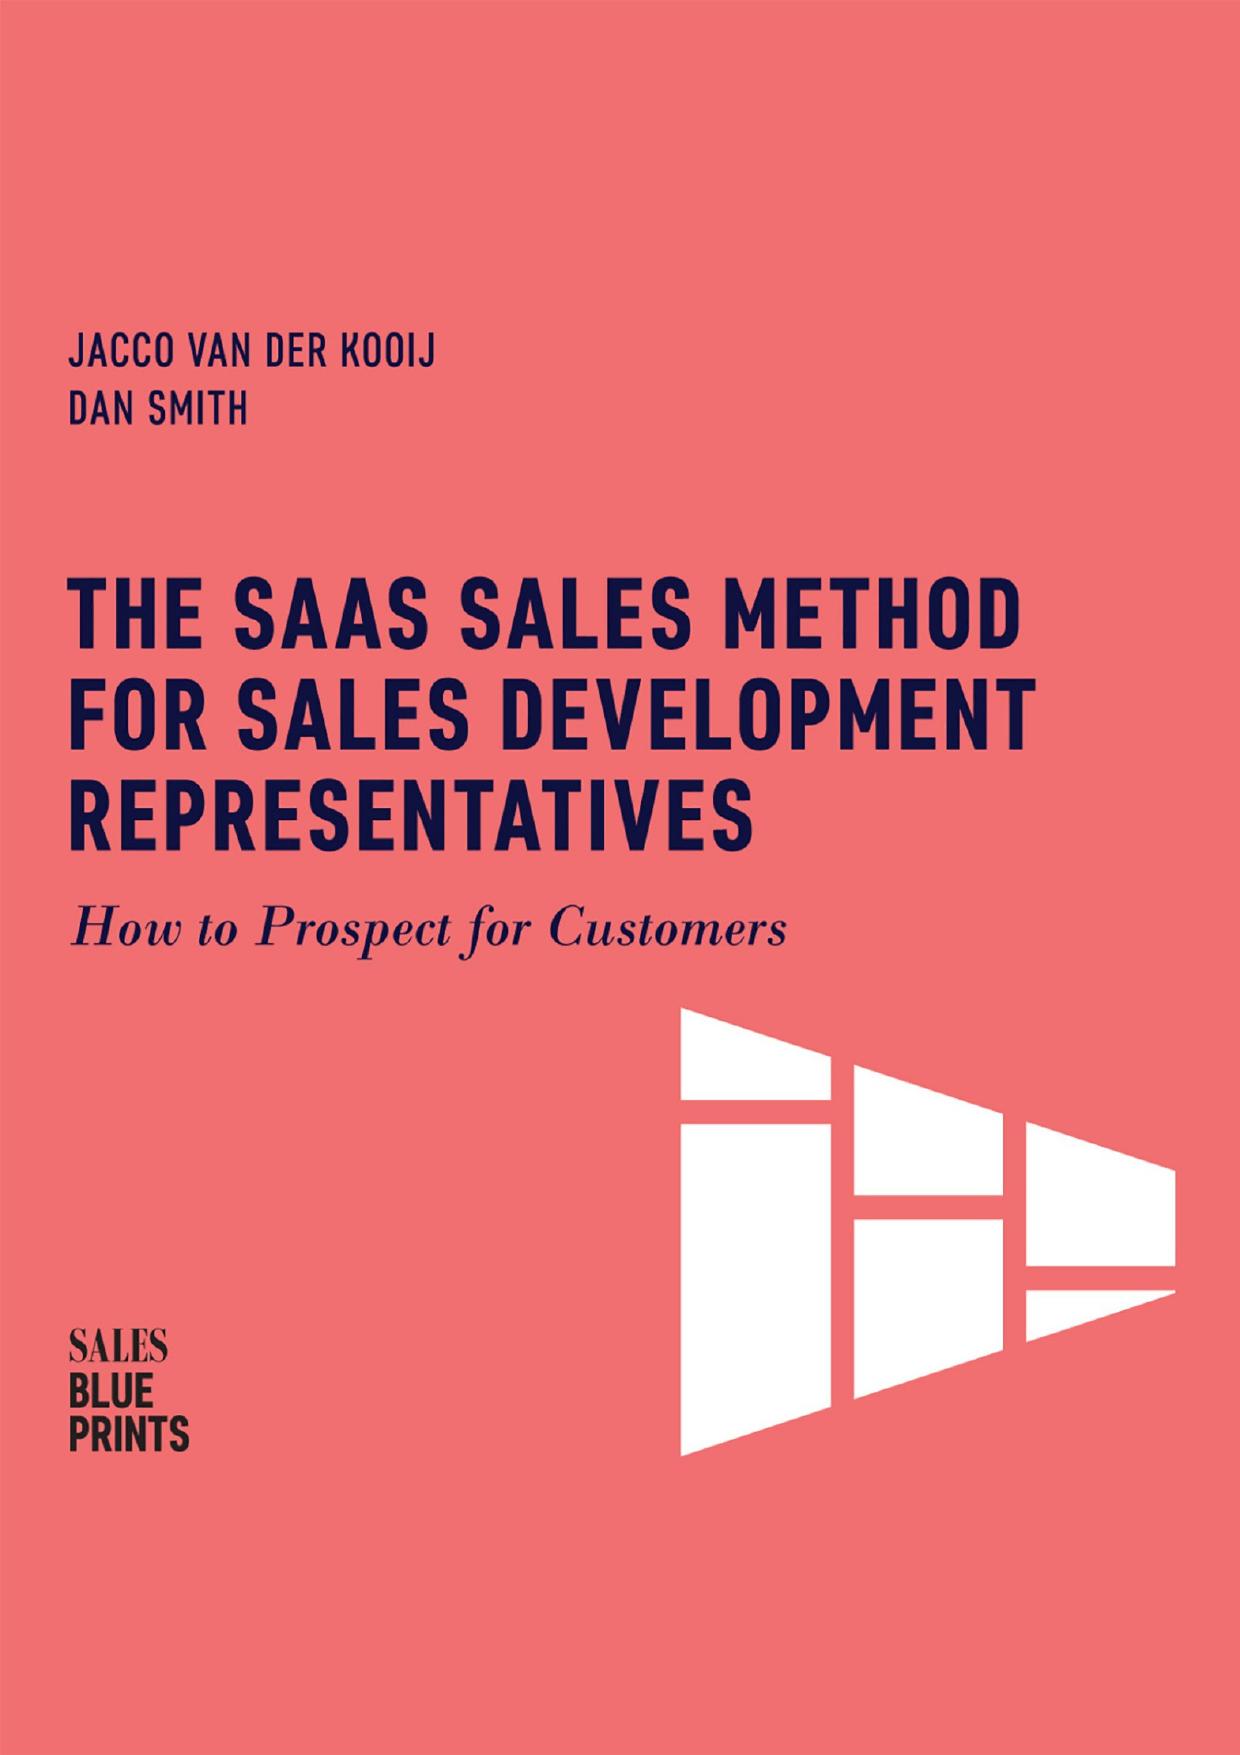 The SaaS Sales Method for Sales Development Representatives: How to Prospect for Customers by Winning By Design